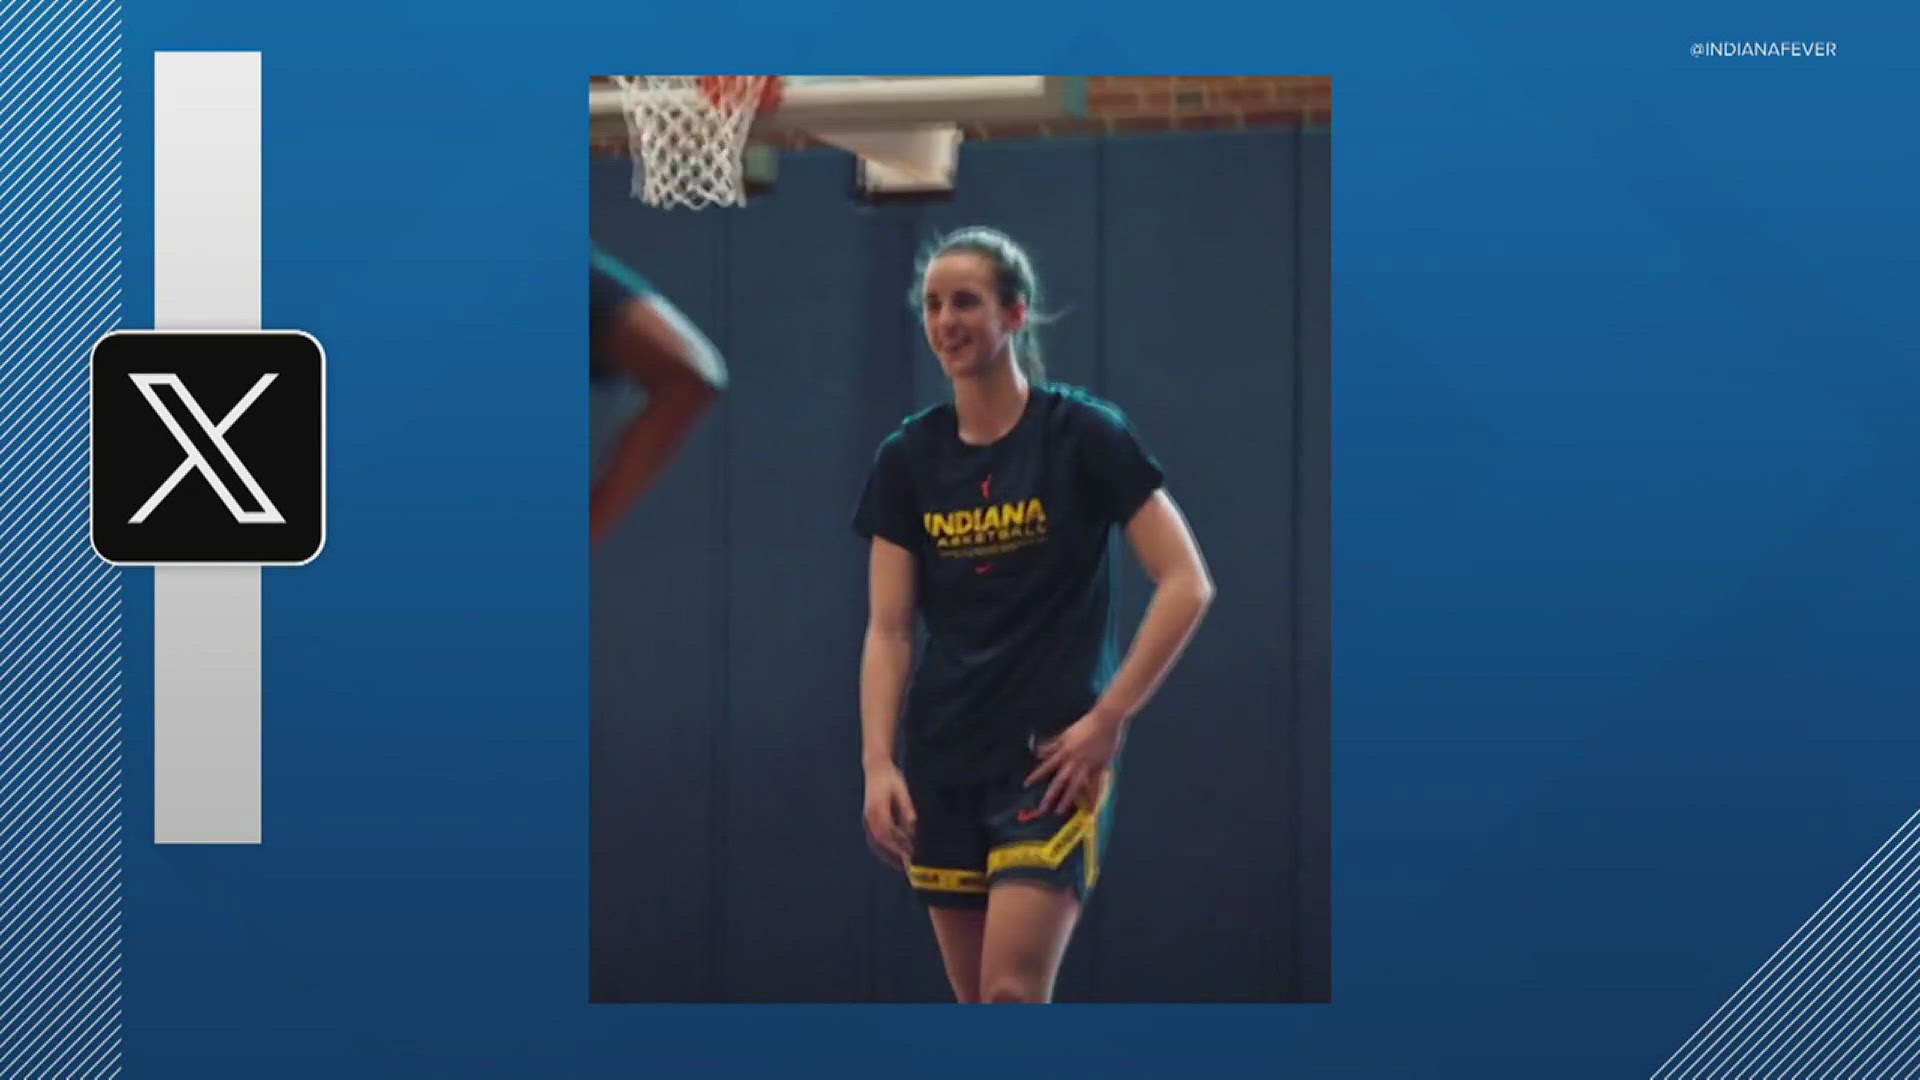 This week the Indiana Fever are showing training camp videos including former Iowa guard Caitlin Clark. She's showing her skills alongside Aliyah Boston.